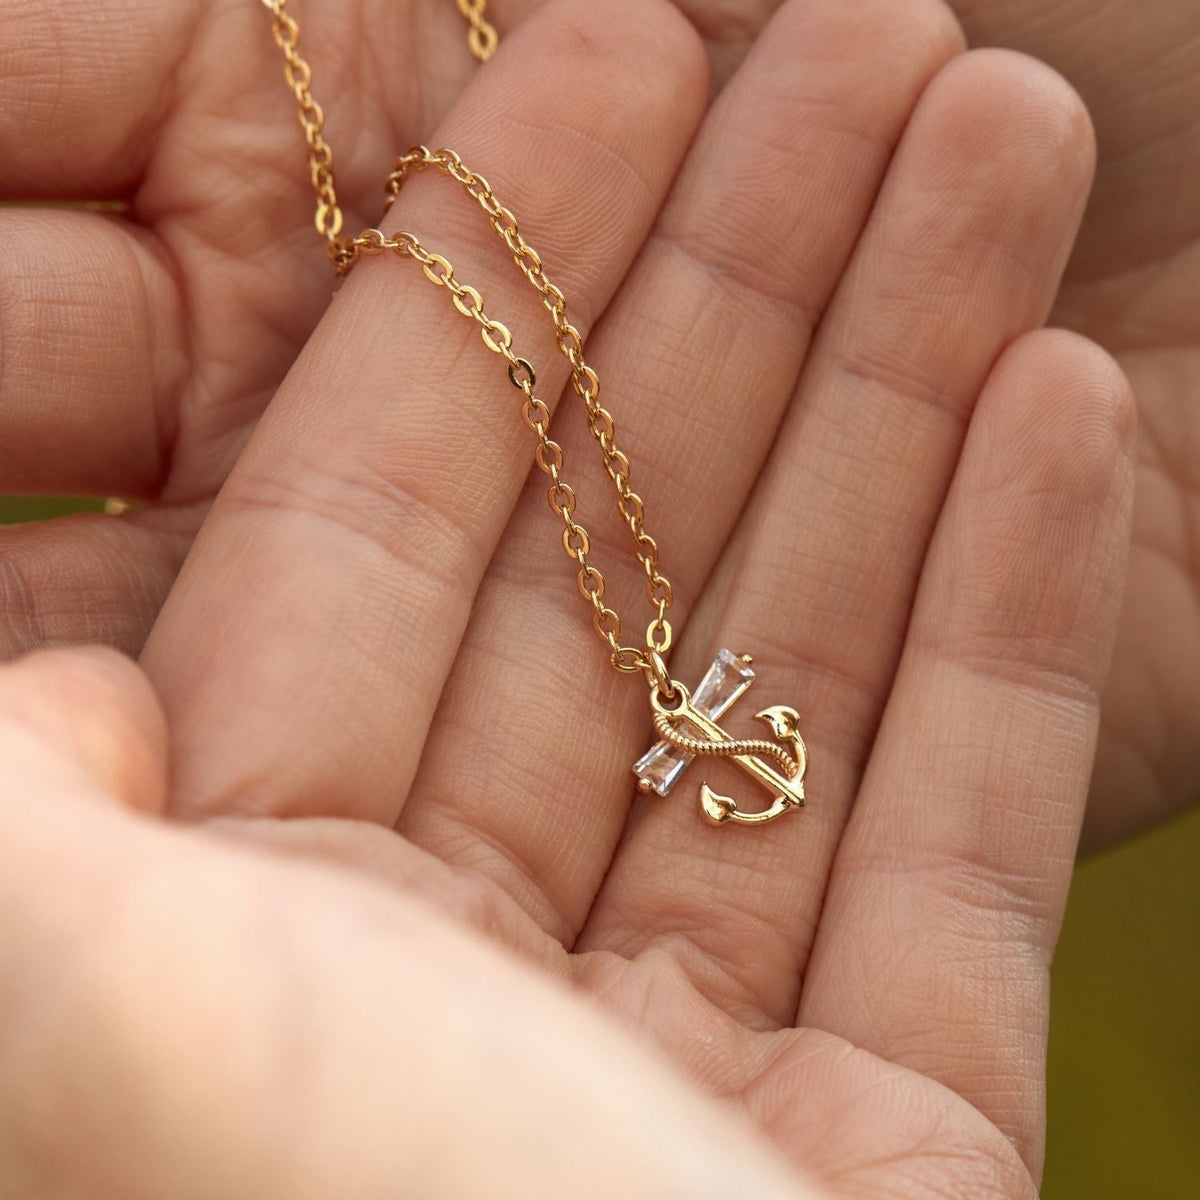 To My Unbiological Sister | So Glad God Brought You | Anchor Necklace